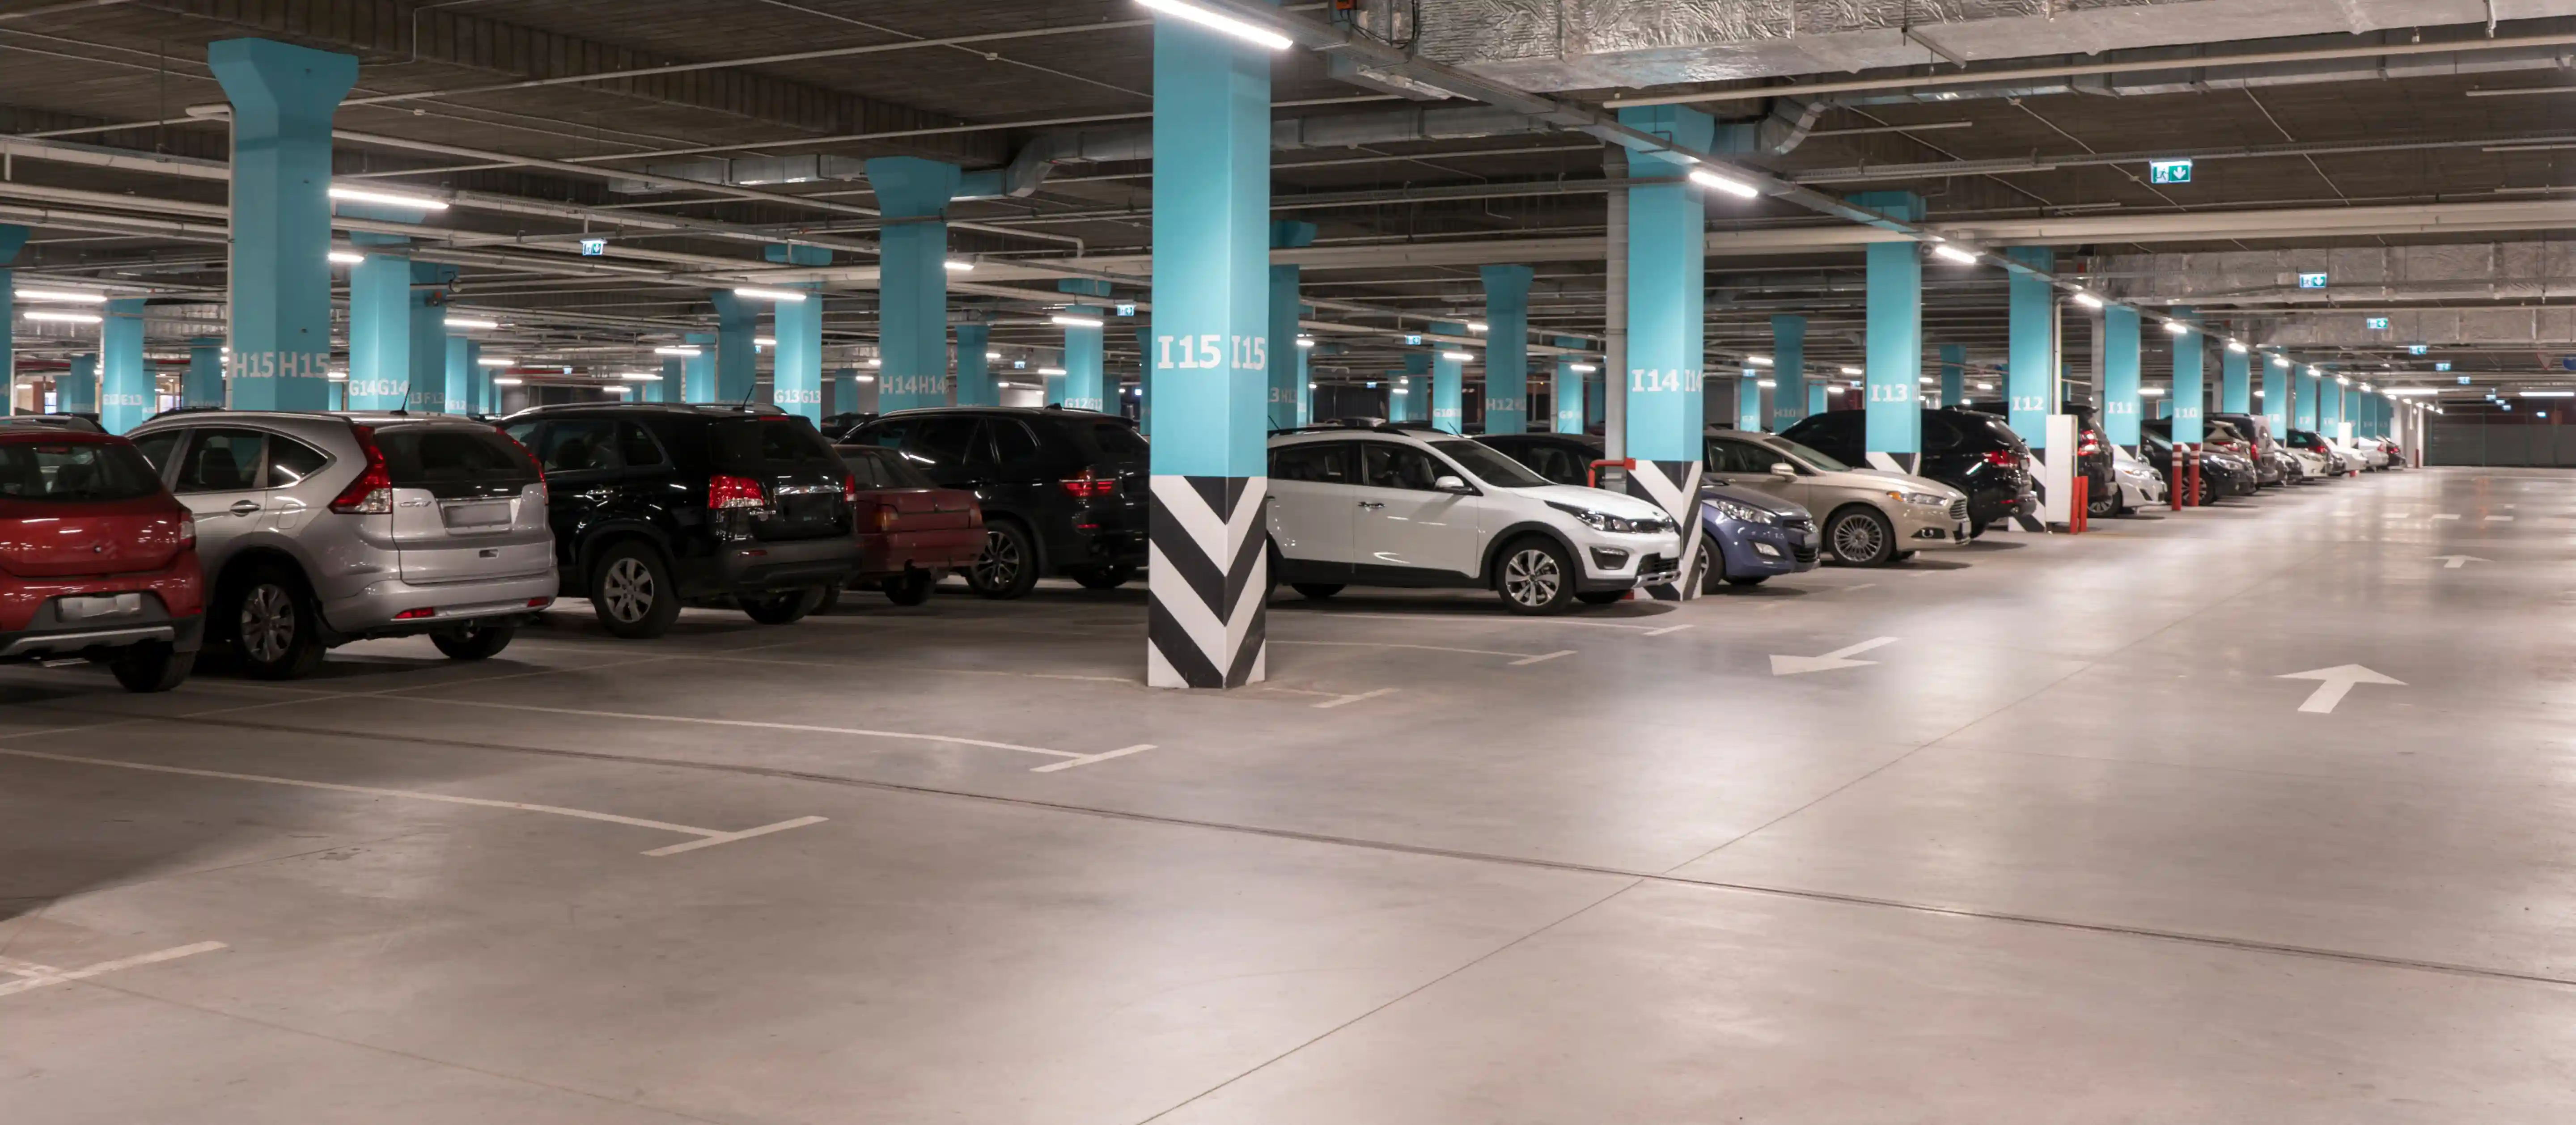 Covered car park with cars